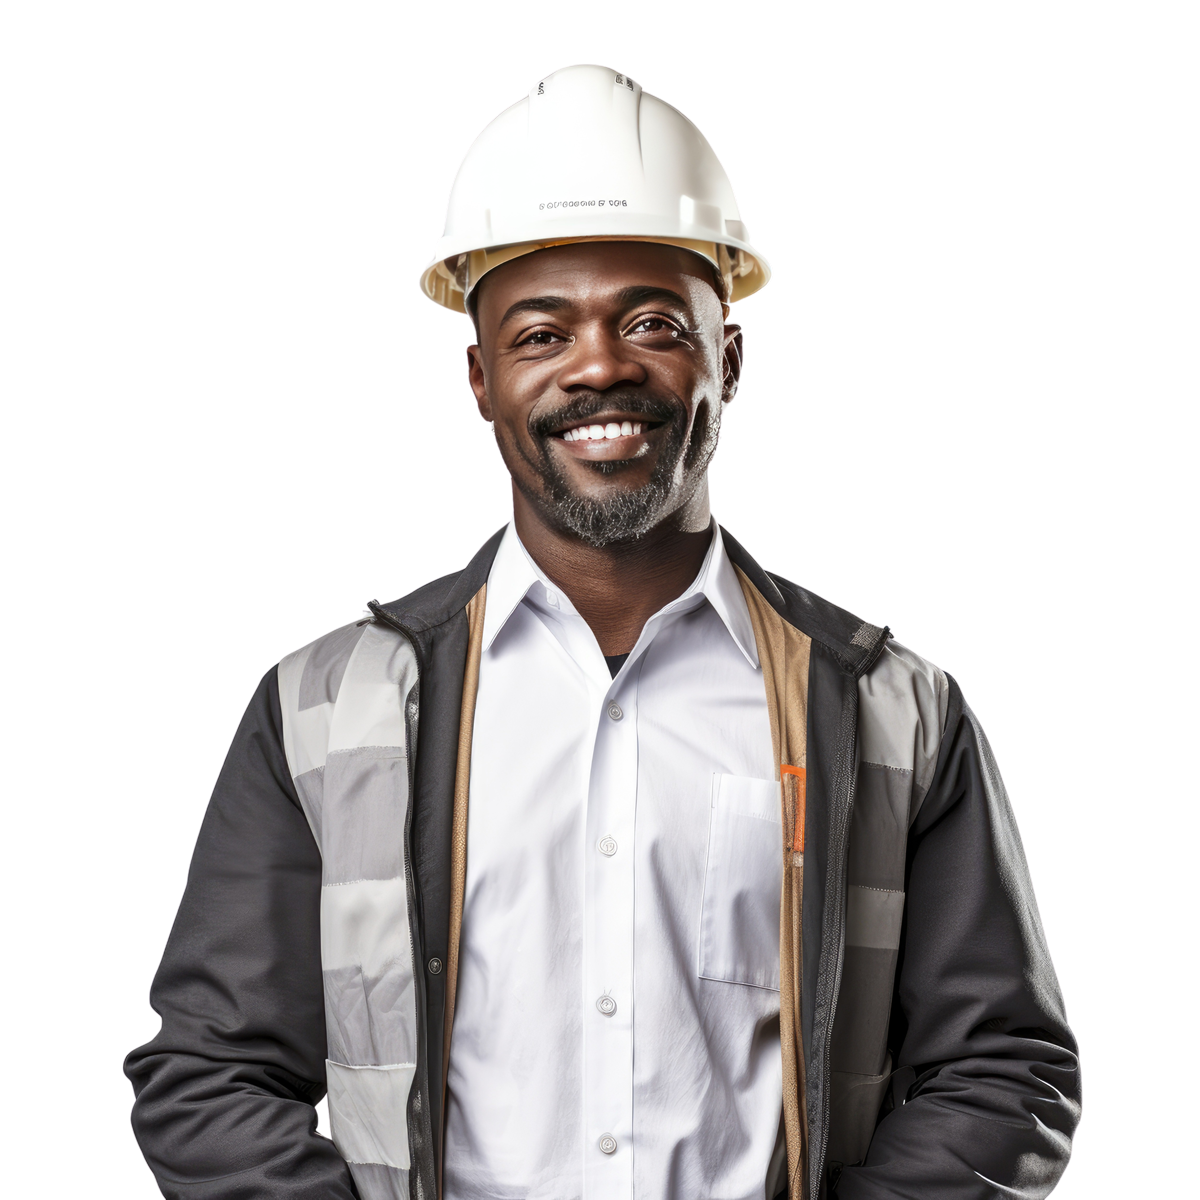 Black male architect standing up, body view, smiling